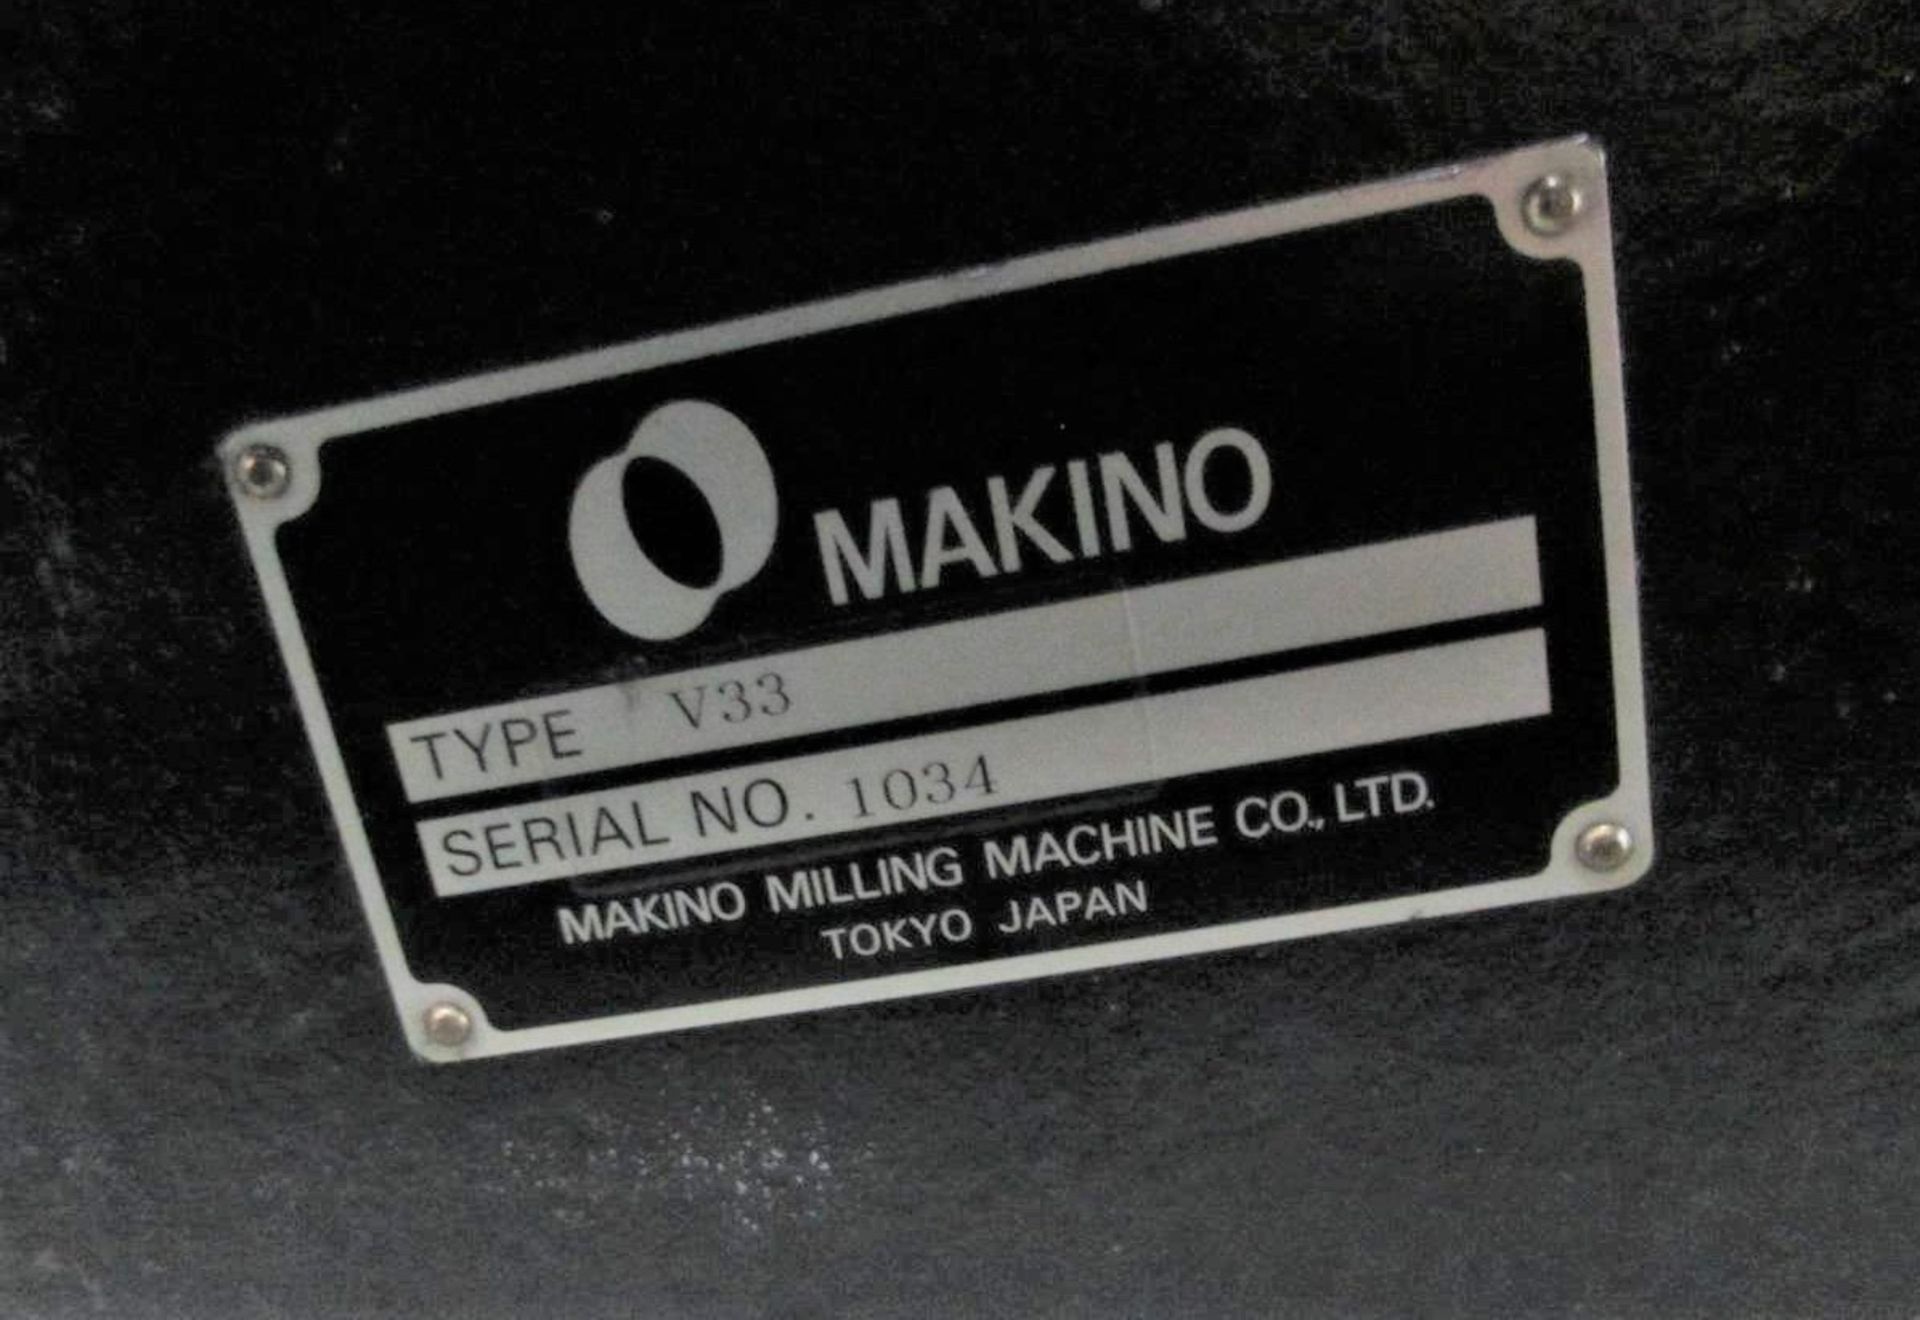 Makino V33 High Speed CNC Vertical Machining Center, 30K RPM Spindle, S/N 1034, New 2003 - Image 10 of 16